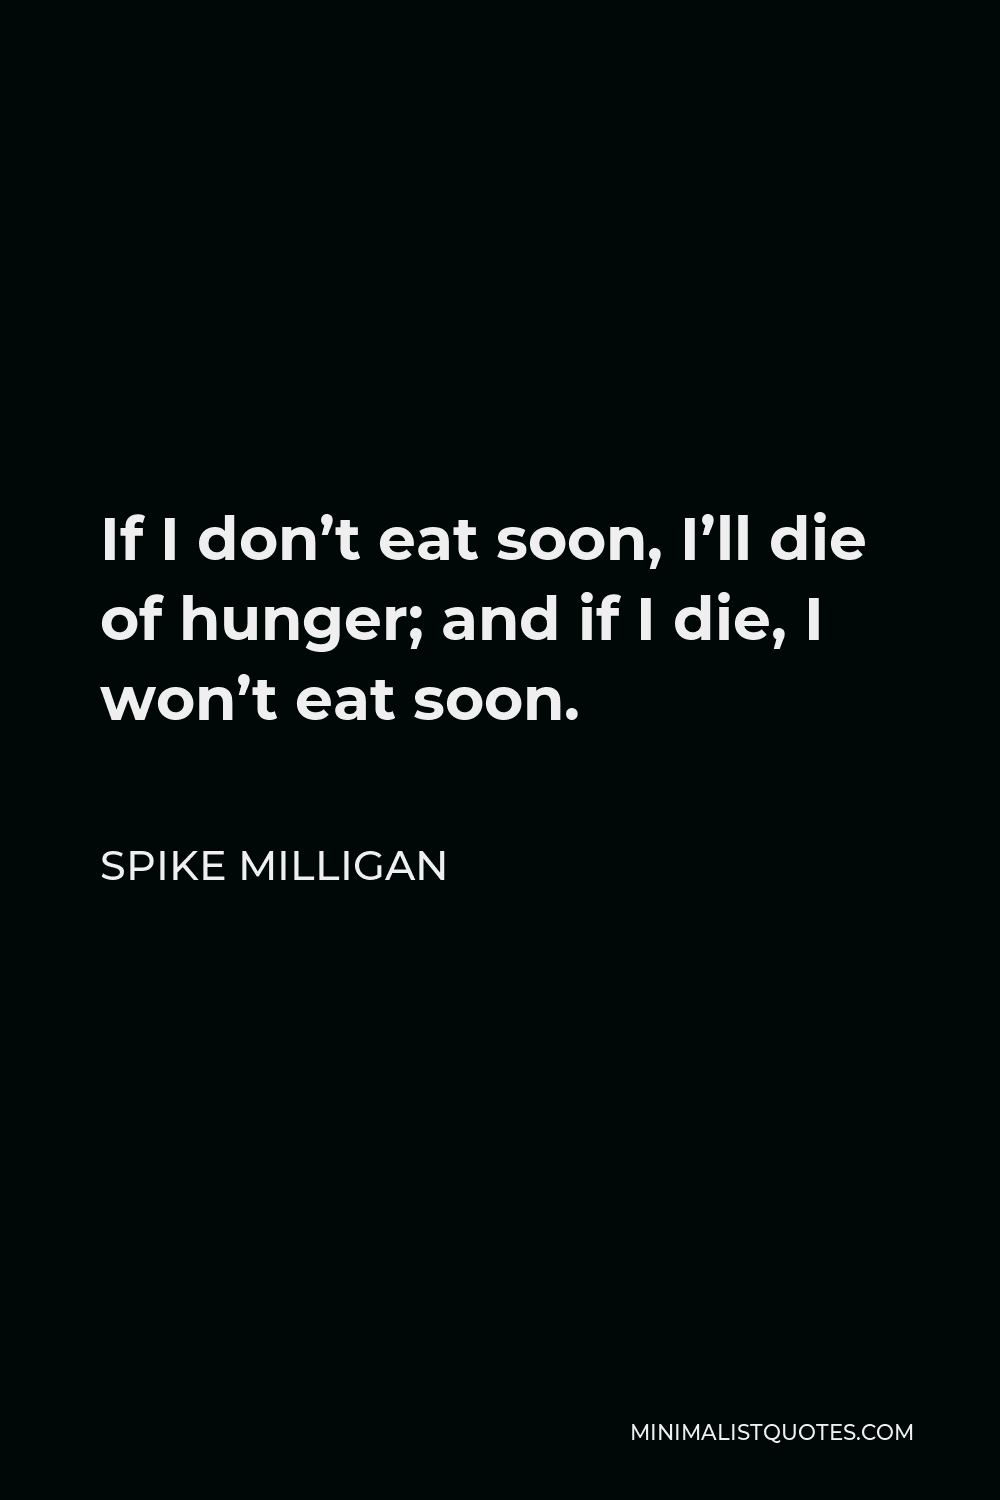 Spike Milligan Quote - If I don’t eat soon, I’ll die of hunger; and if I die, I won’t eat soon.